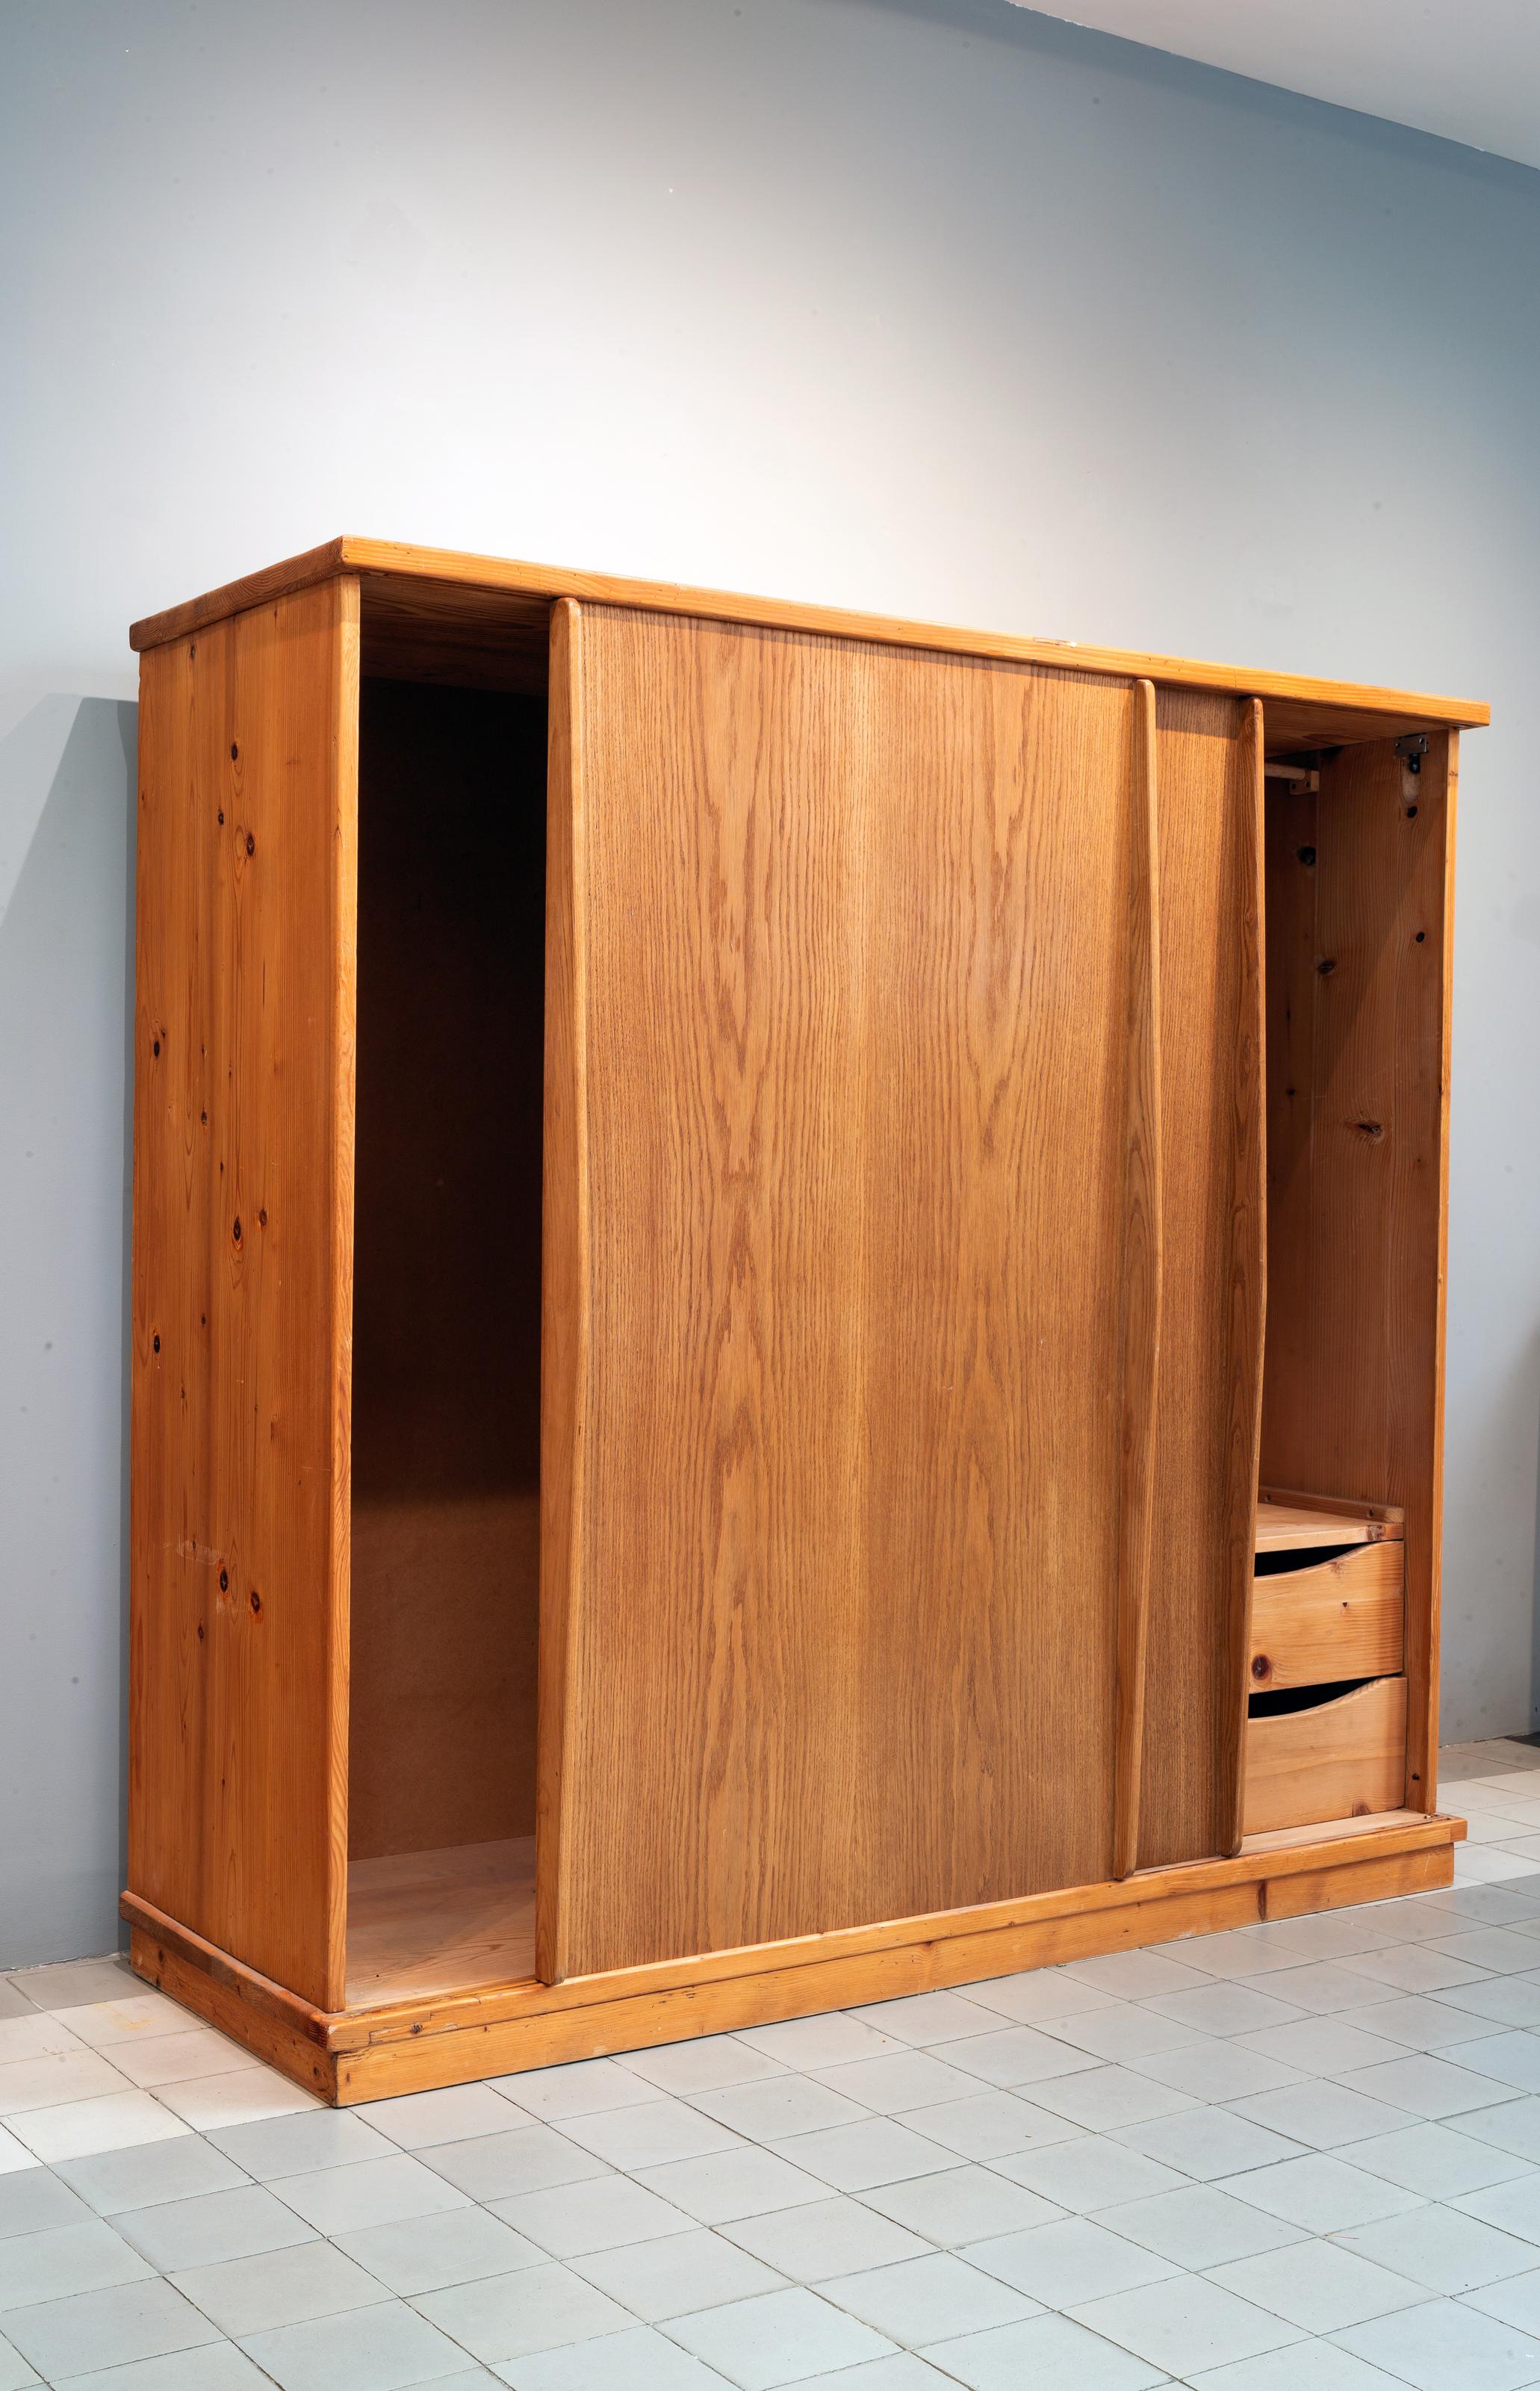 Charlotte Perriand, 1903-1999
& Pierre Jeanneret, 1896-1967,
France

Wardrobe n°5 designed in 1939 and made by l’Equipement de la Maison from 1946-1952.
Body in solid pine with two sliding doors in plywood, projecting-bow door grips are also in